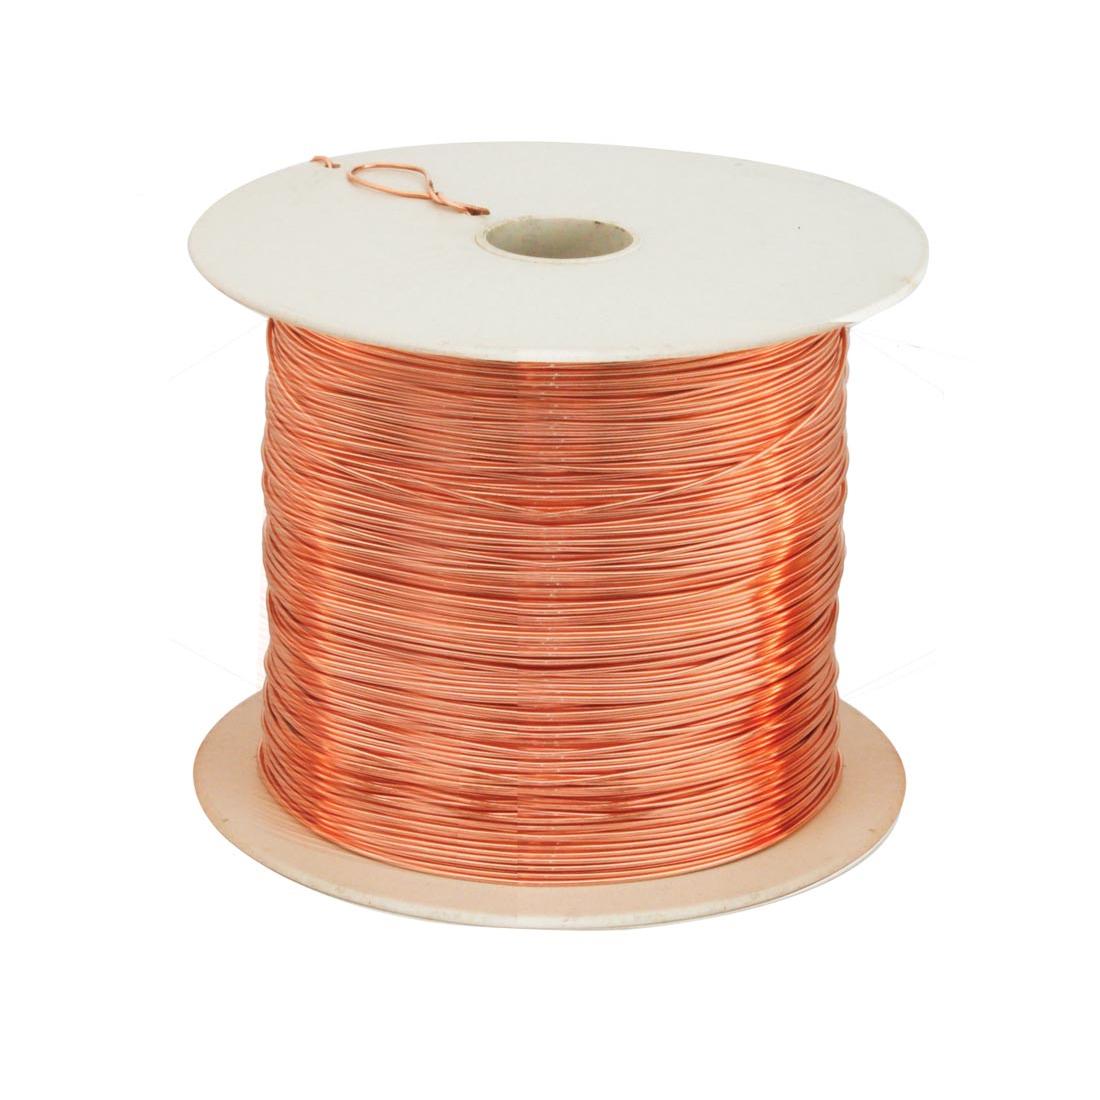 Spool of Parawire Copper Wire